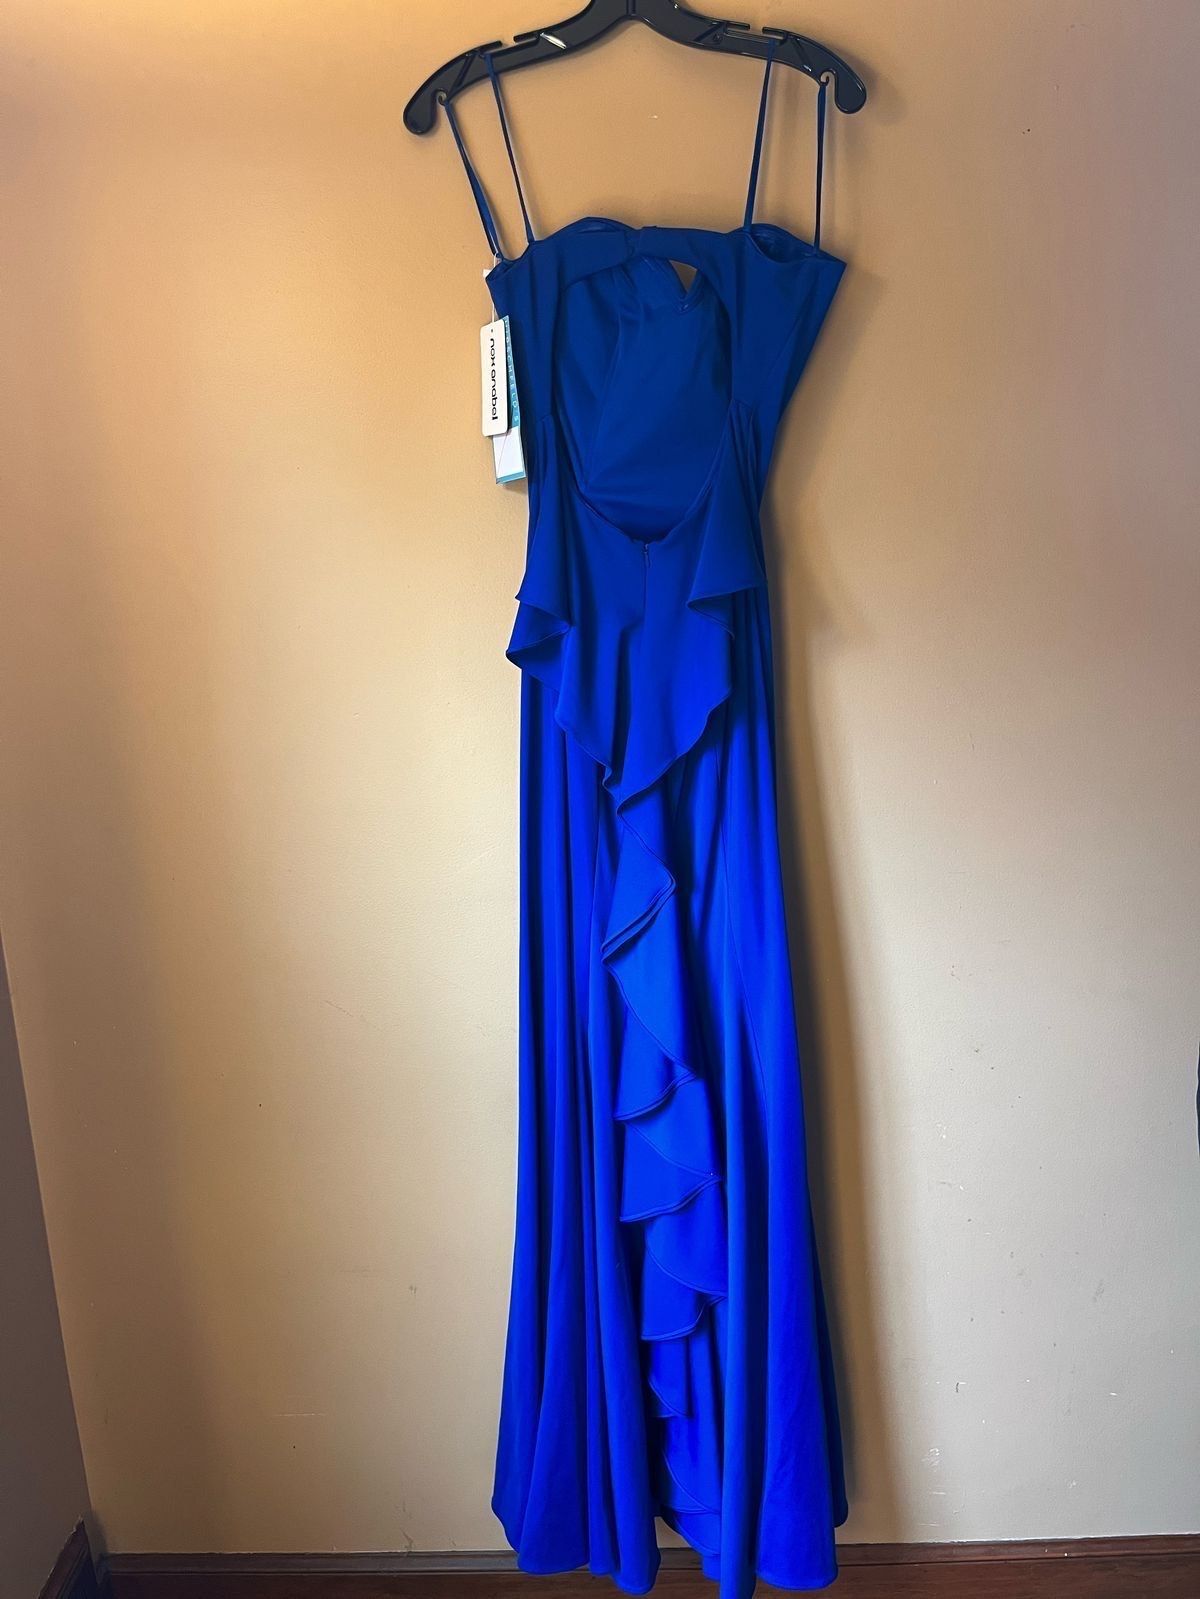 Size S Prom Off The Shoulder Blue Mermaid Dress on Queenly